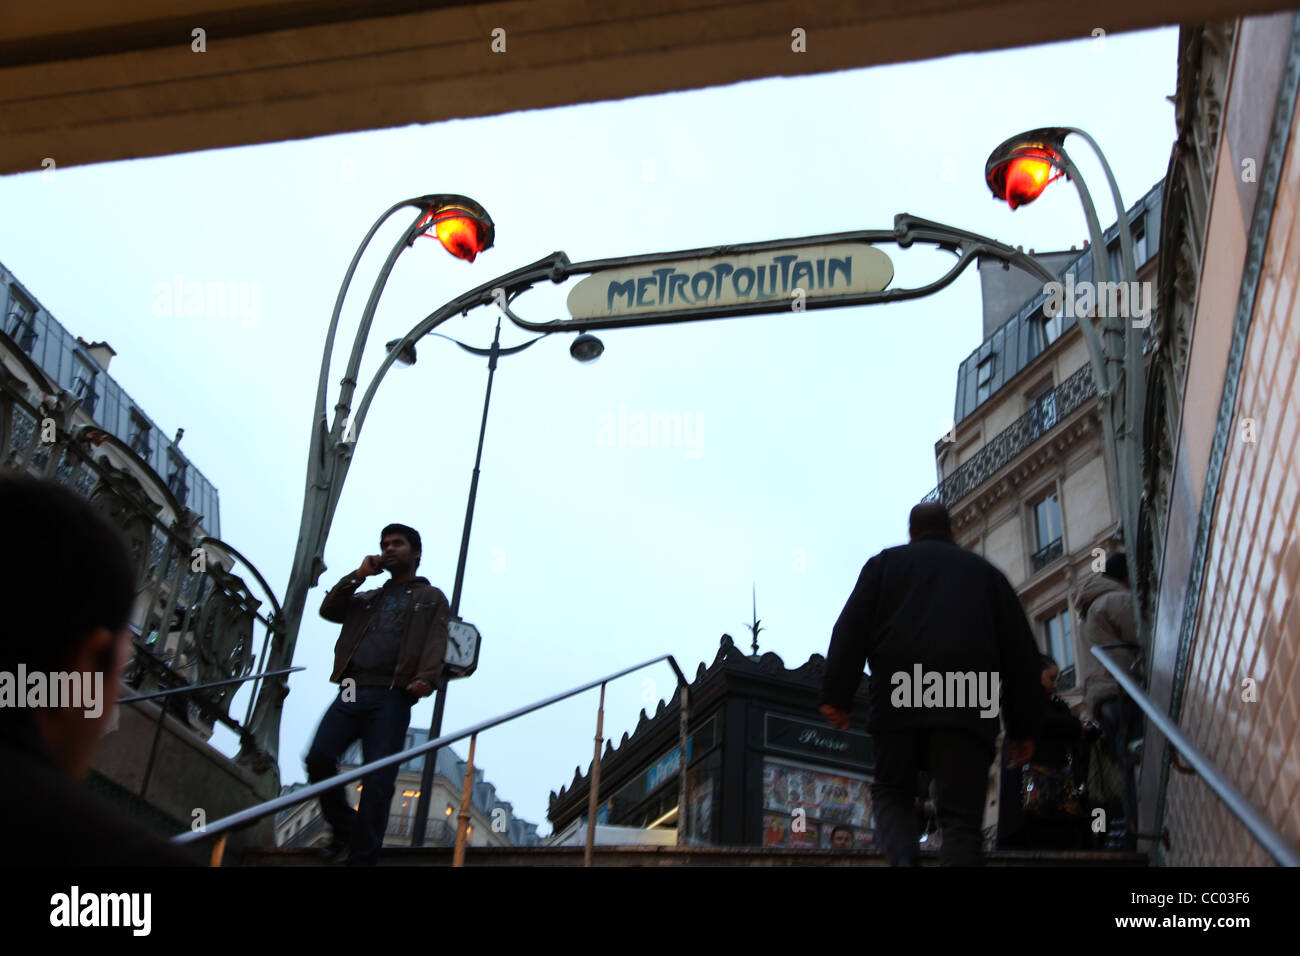 People enter and exit the Paris Metro subway on a winter day at dusk Stock Photo